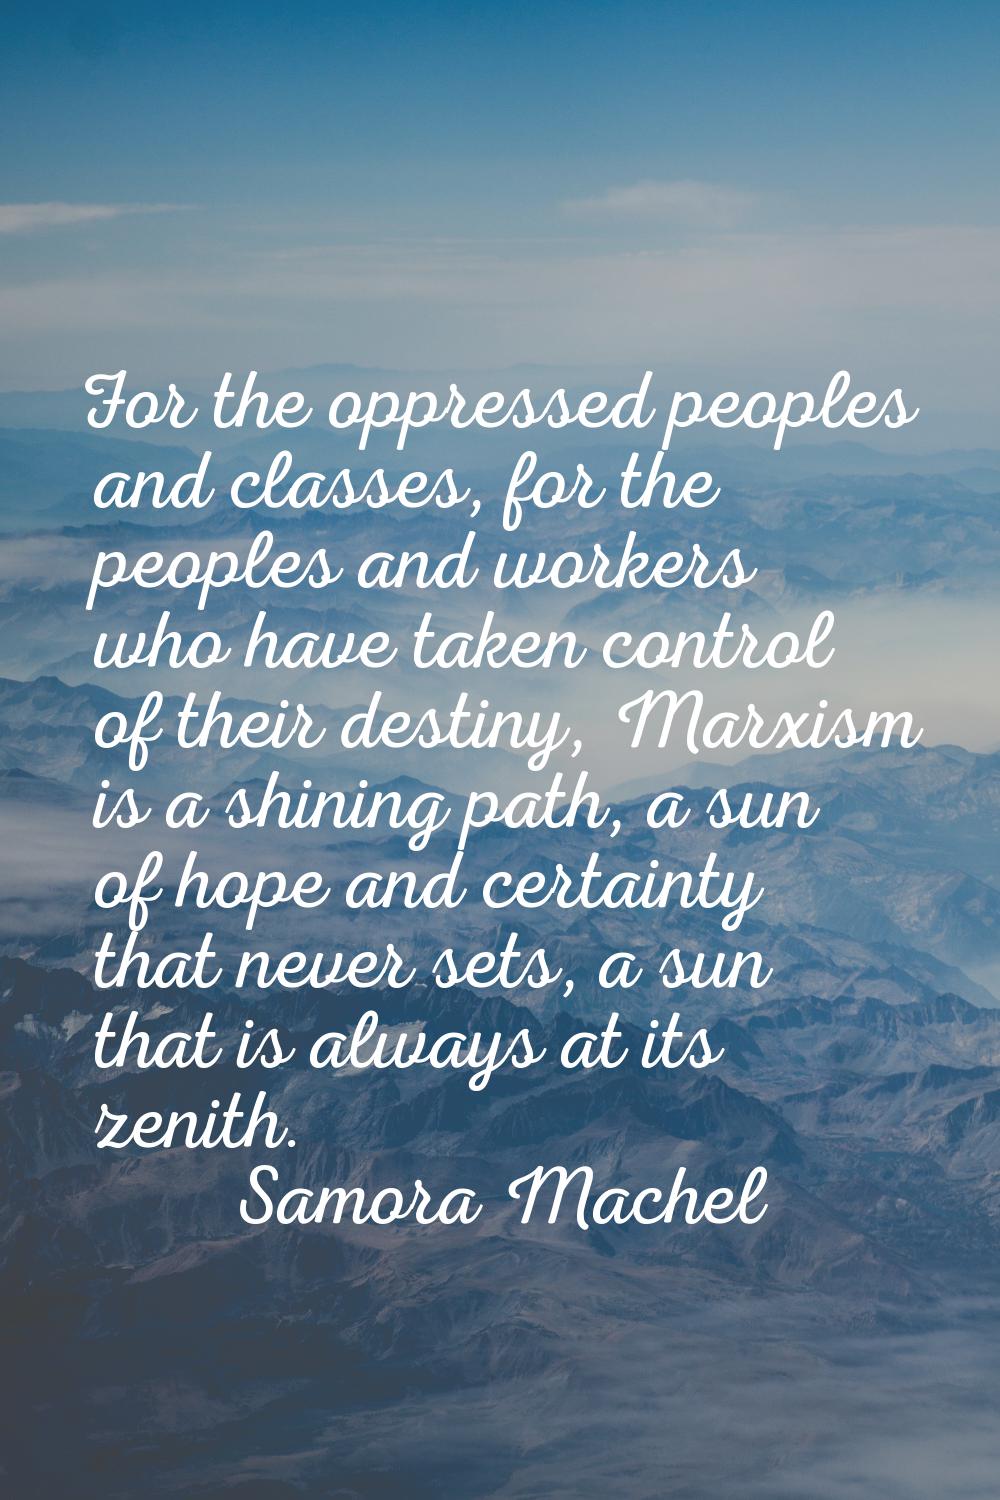 For the oppressed peoples and classes, for the peoples and workers who have taken control of their 